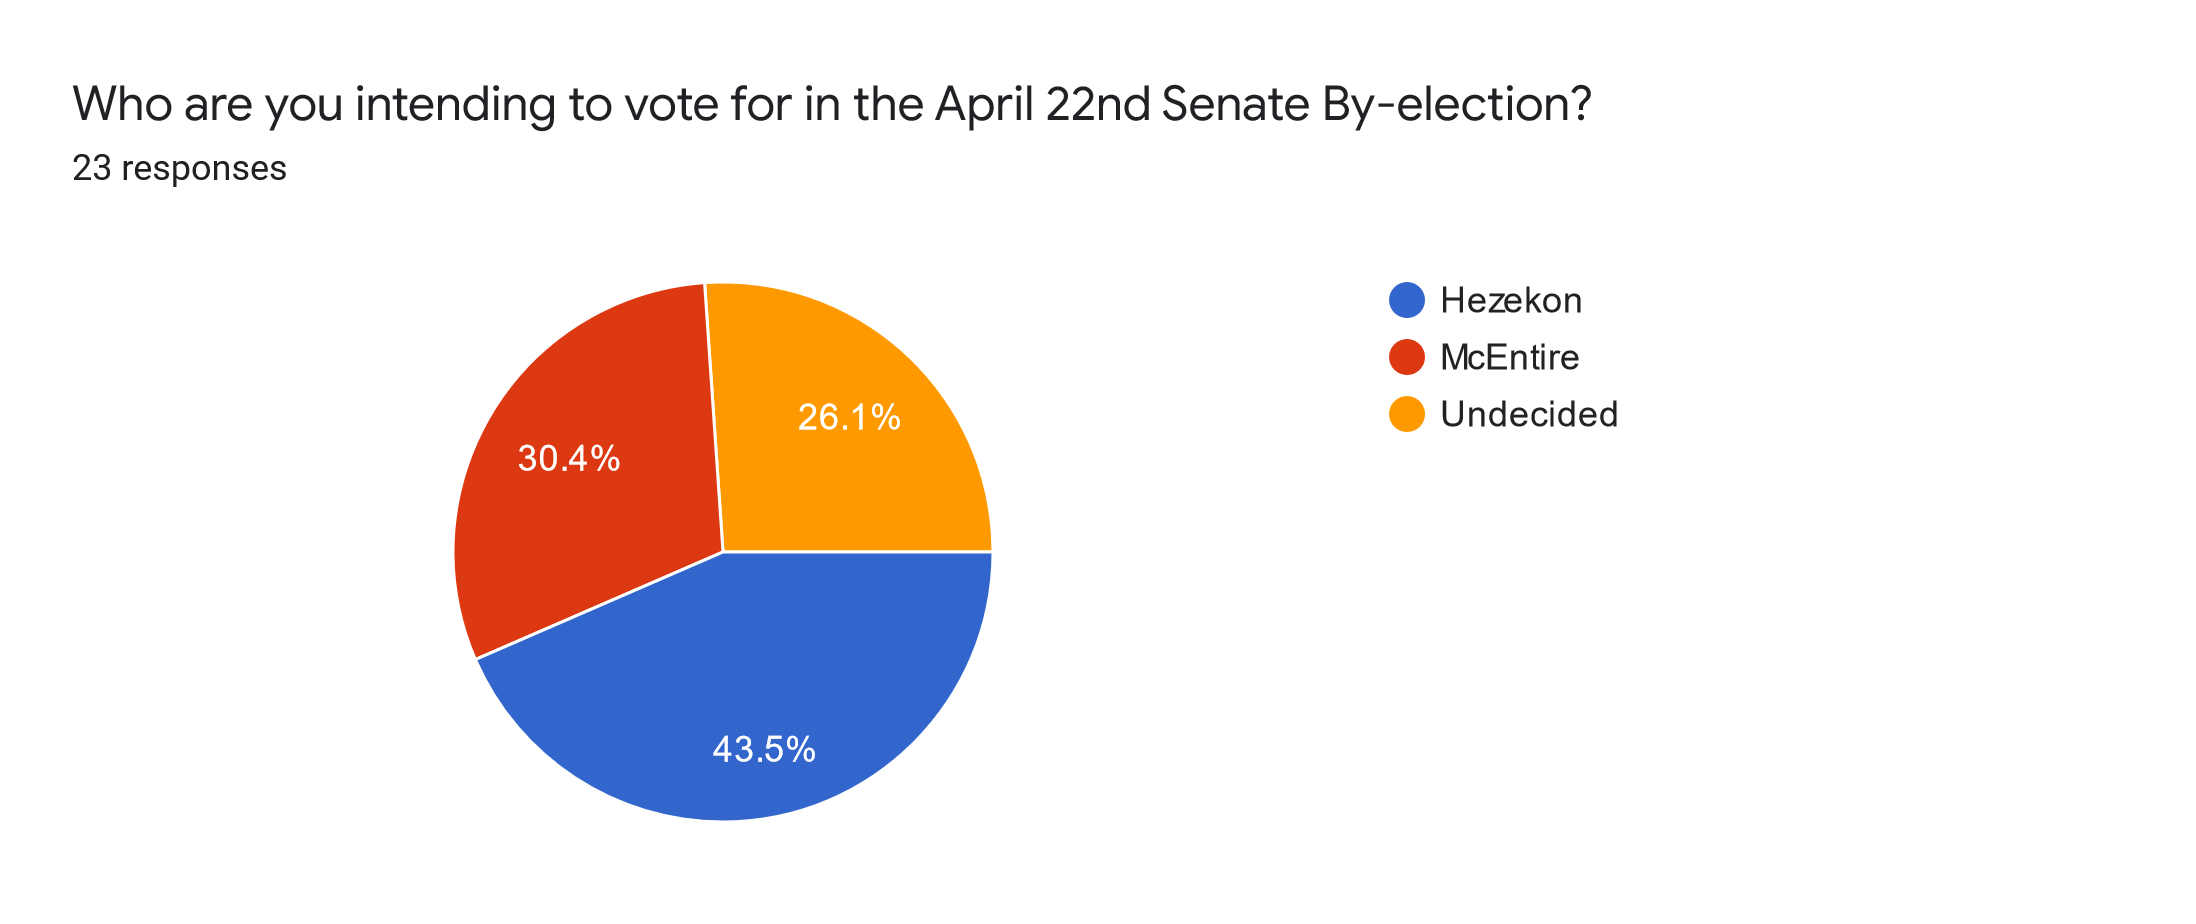 Forms response chart. Question title: Who are you intending to vote for in the April 22nd Senate By-election?. Number of responses: 23 responses.